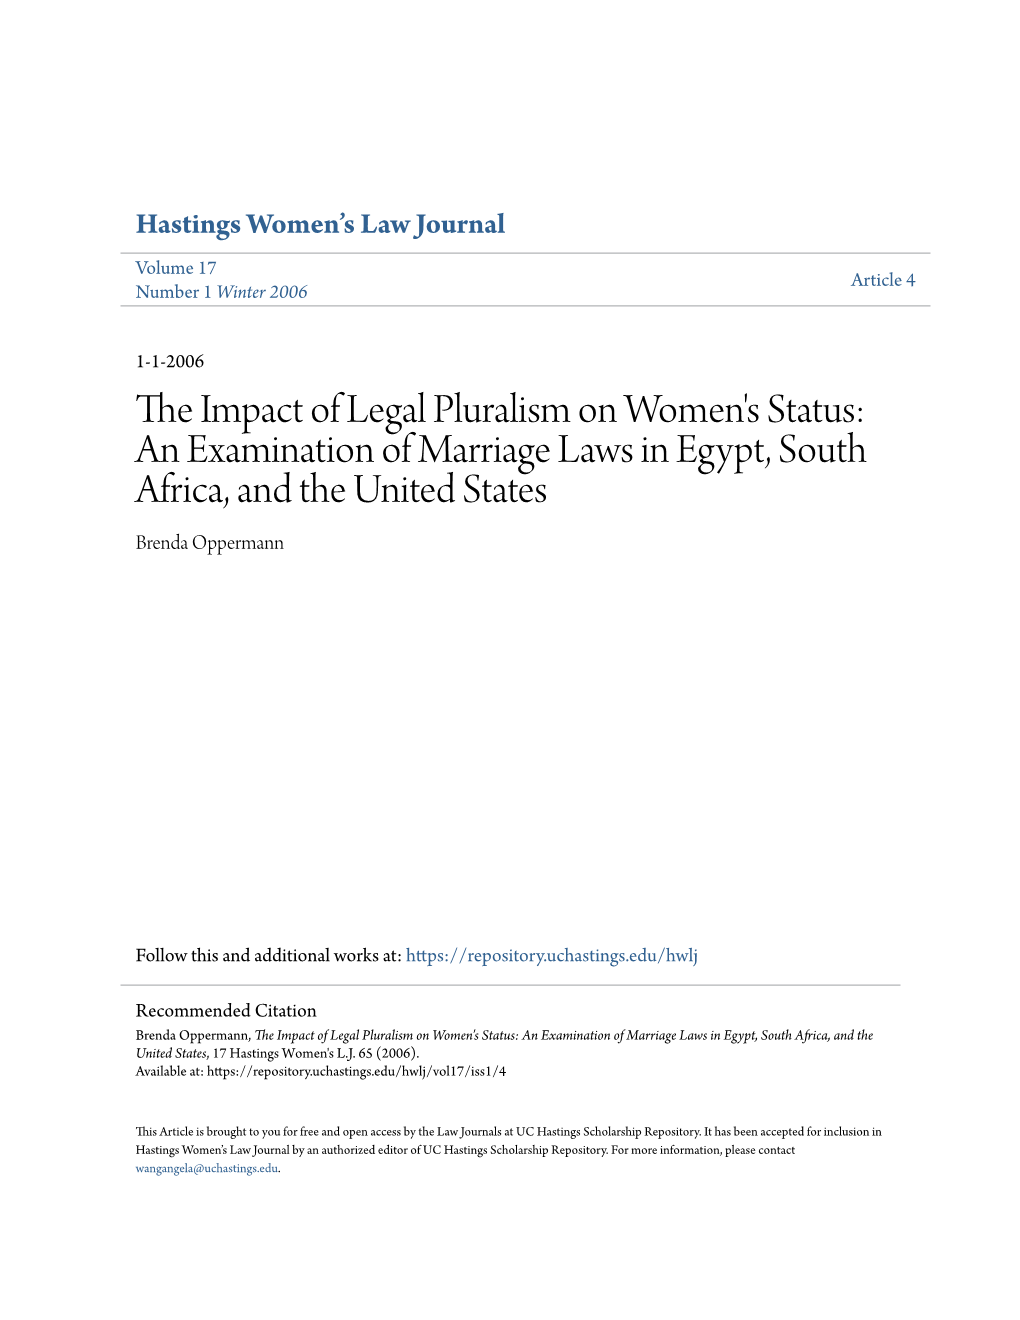 The Impact of Legal Pluralism on Women's Status: an Examination of Marriage Laws in Egypt, South Africa, and the United States, 17 Hastings Women's L.J